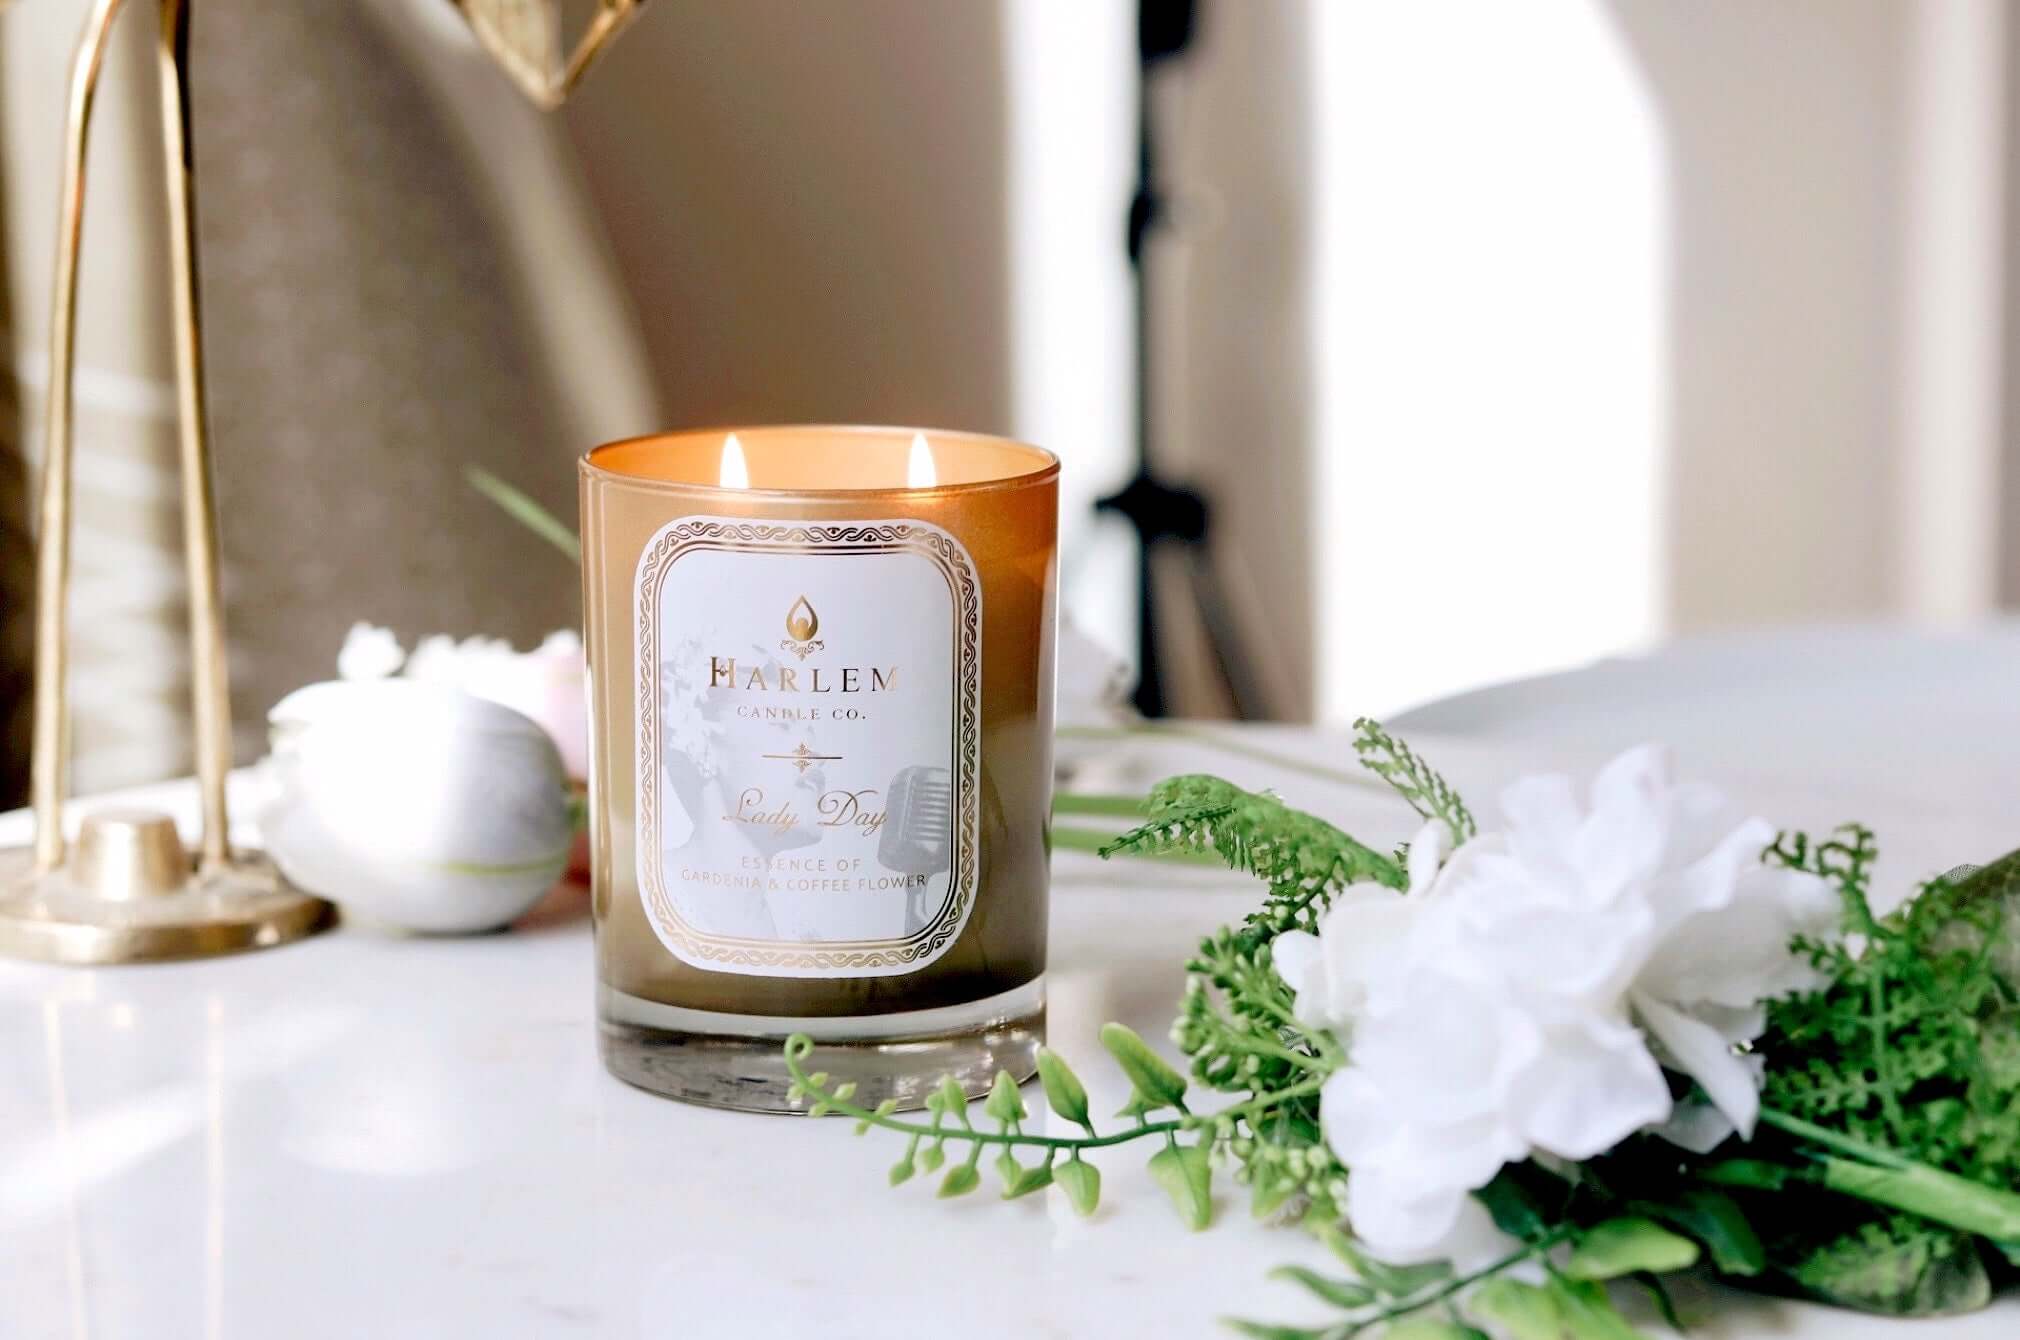 A lifestyle image of our Lady Day Gold 12 oz 2 wick candle, lit, sitting on a white table with greenery and flowers surrounding the gold candle.